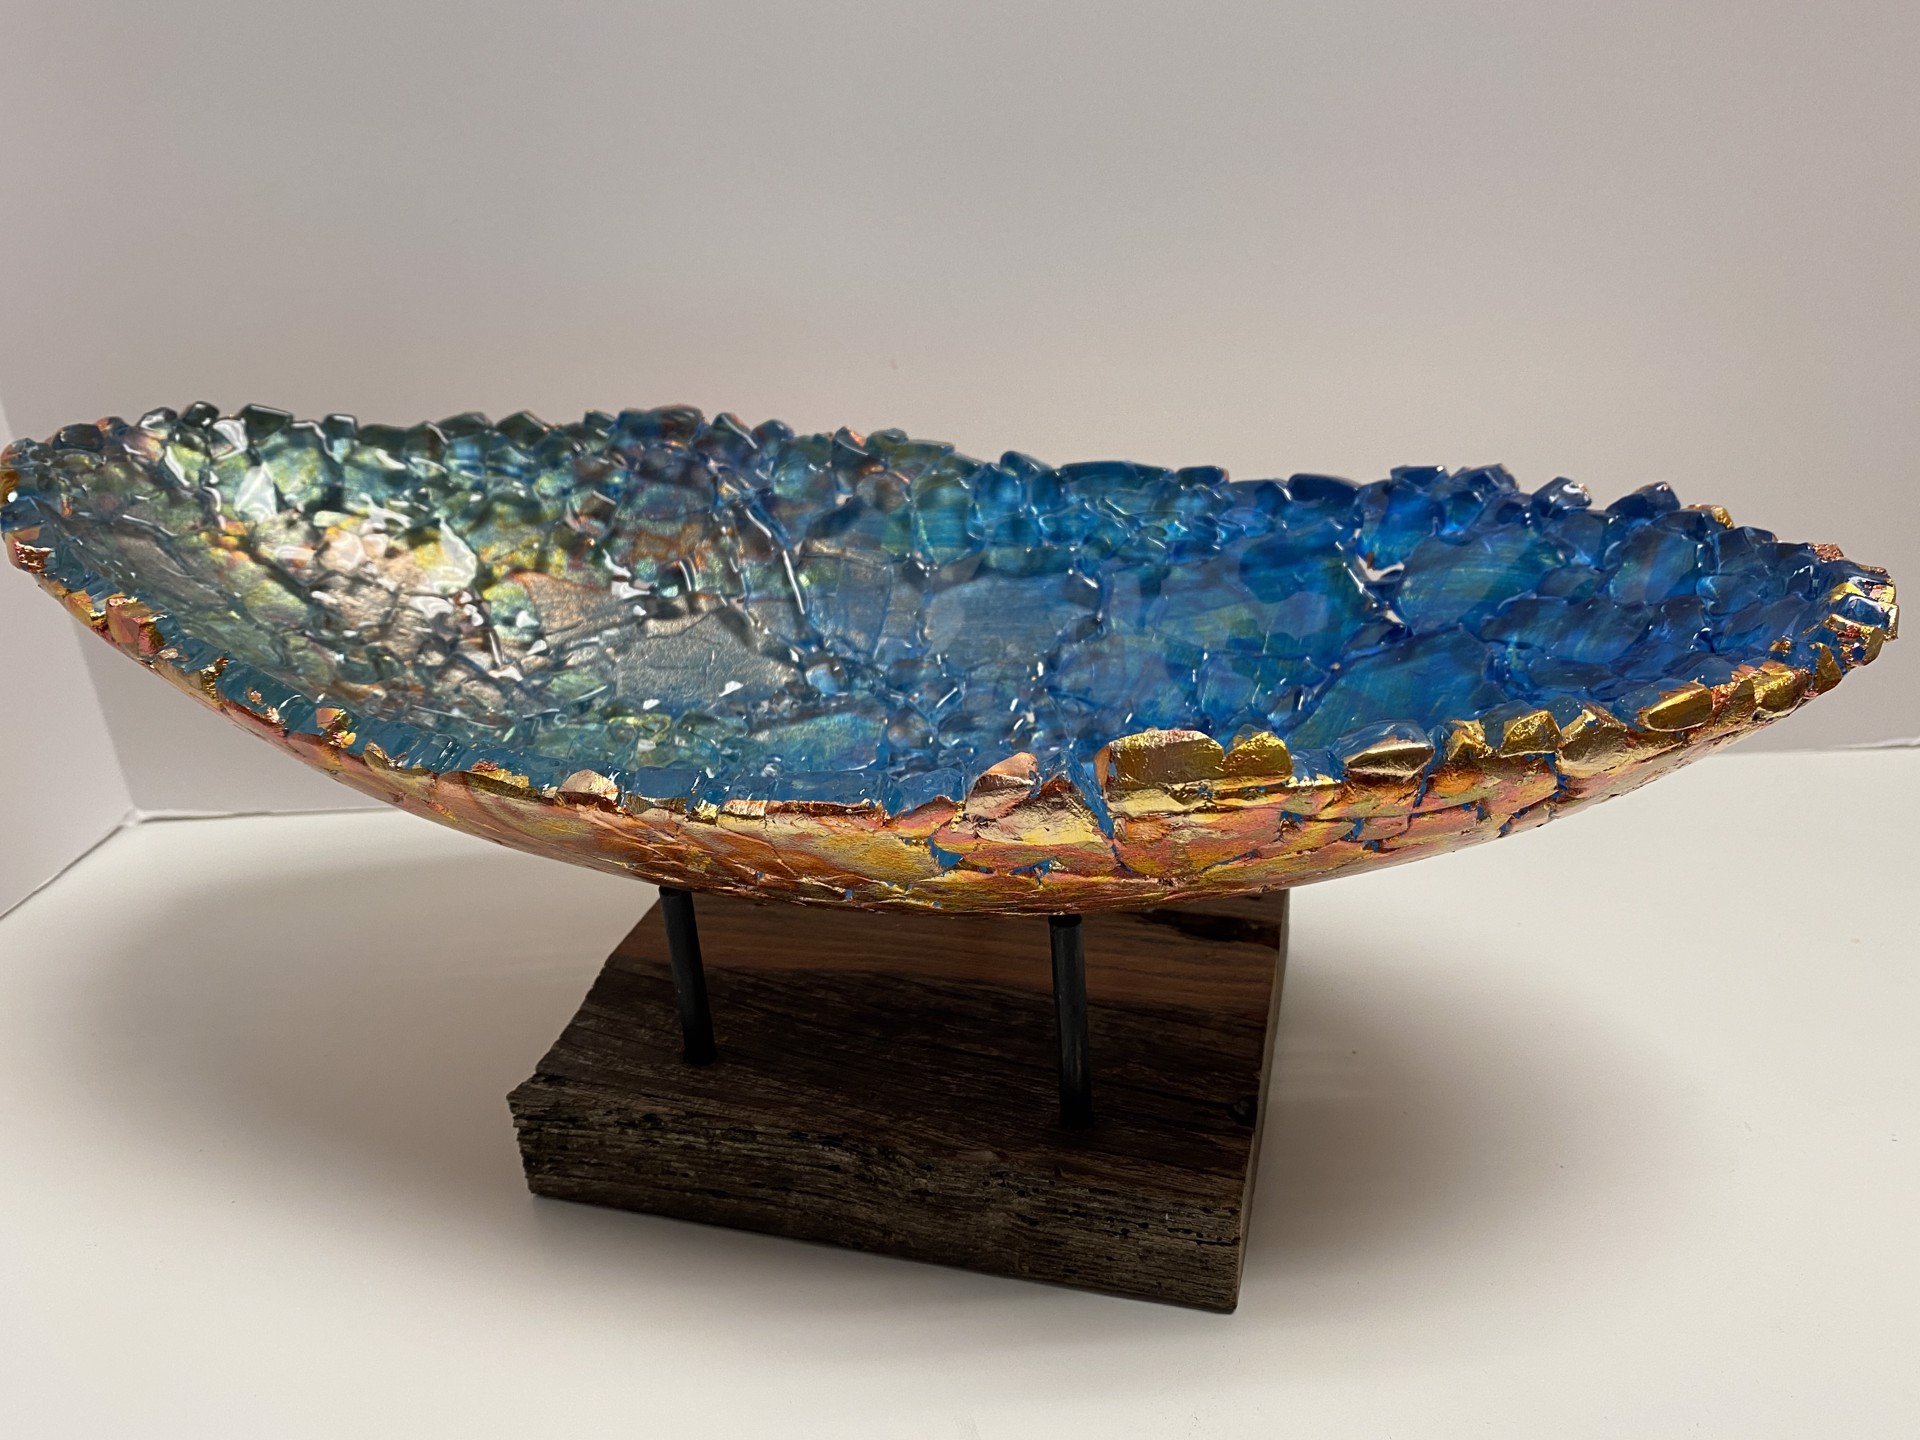 Elevated Oblong Vessel (Blue) by Mira Woodworth